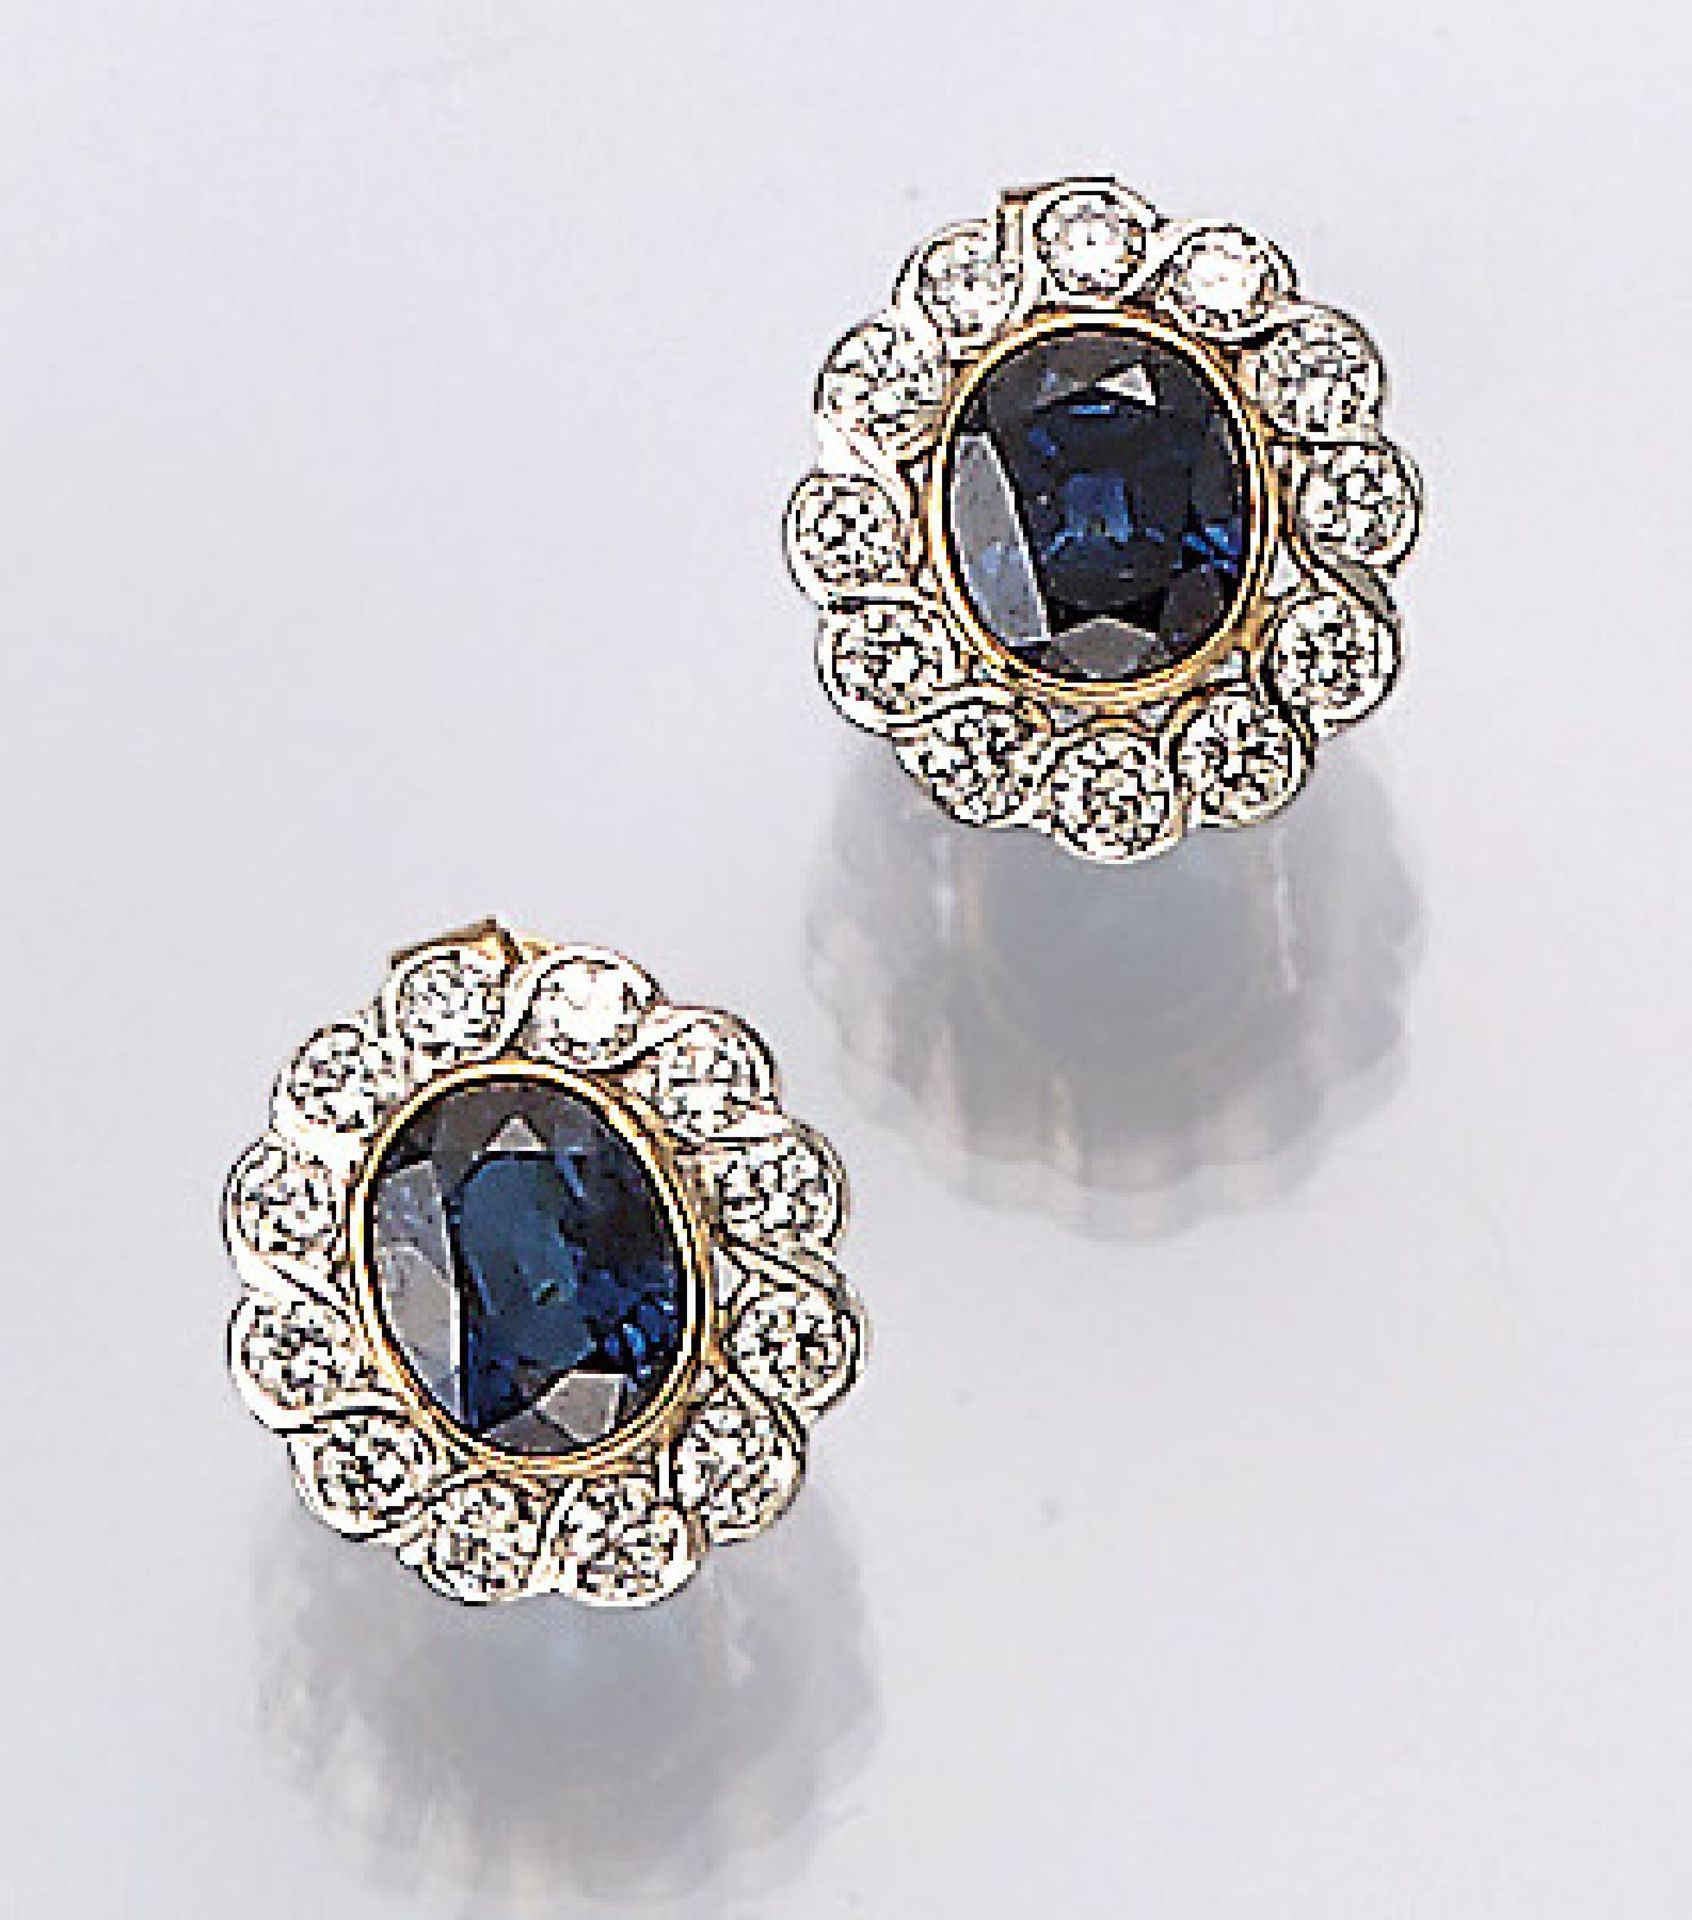 Pair of 18 kt gold earrings with sapphires andbrilliants , YG/WG 750/000, 2 sapphires approx. 1.5 - Bild 2 aus 2